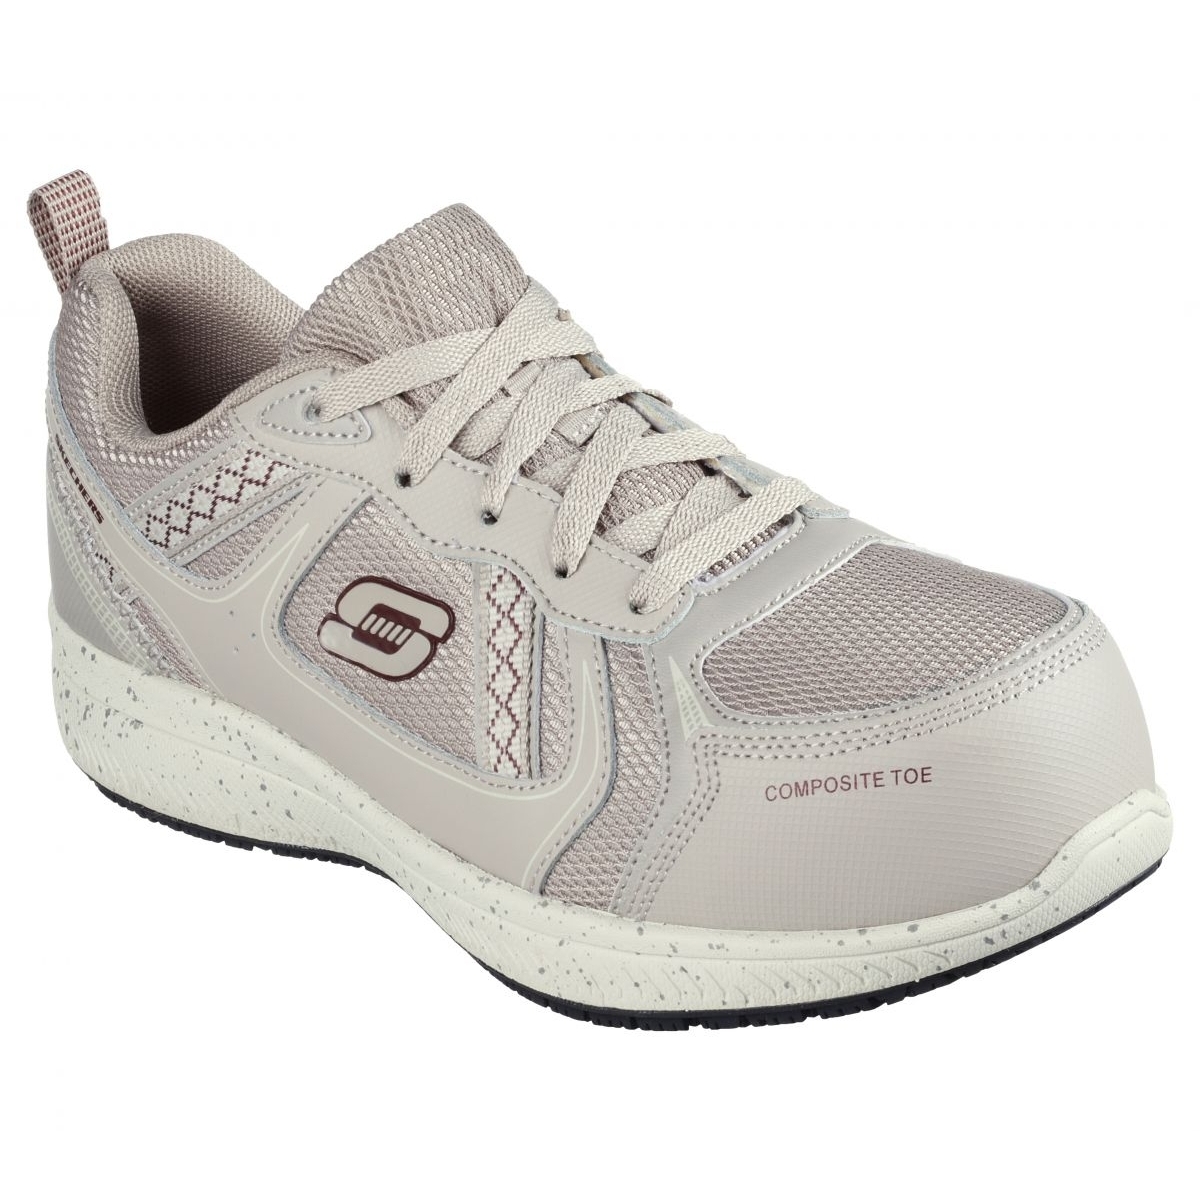 Skechers ELG-5 - Composite Toe TAUPE - TAUPE, 11